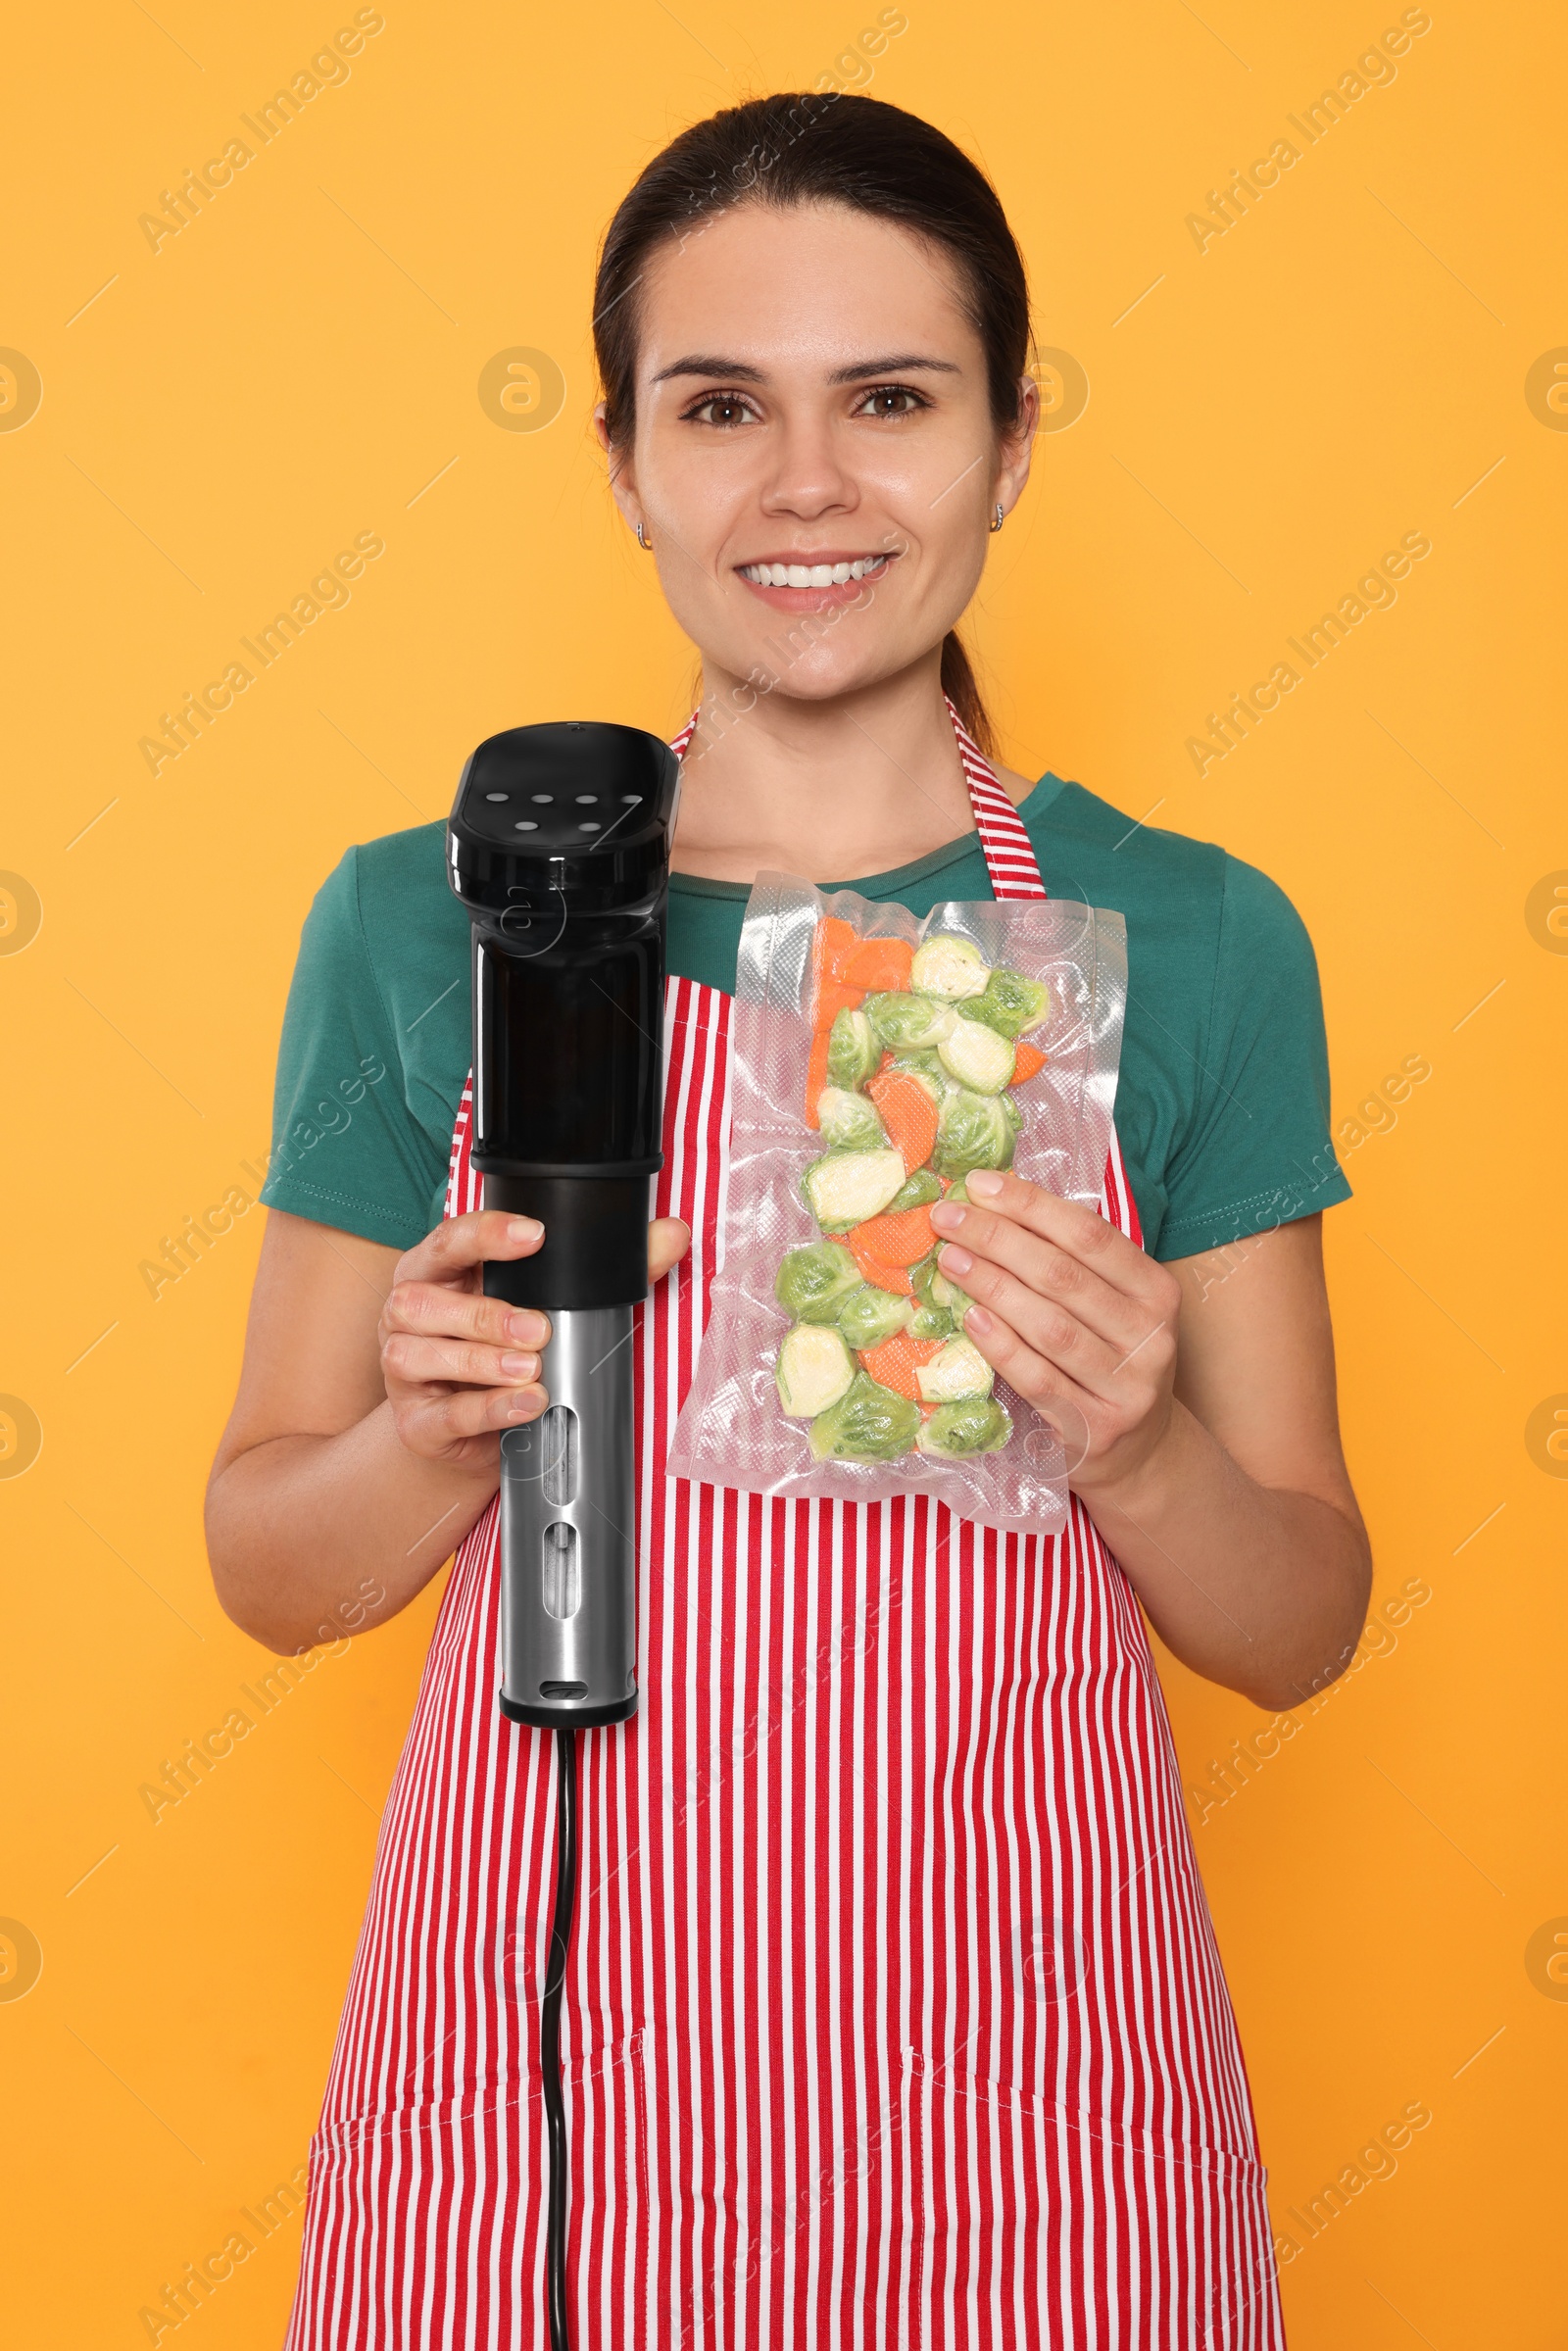 Photo of Beautiful young woman holding sous vide cooker and vegetables in vacuum pack on orange background